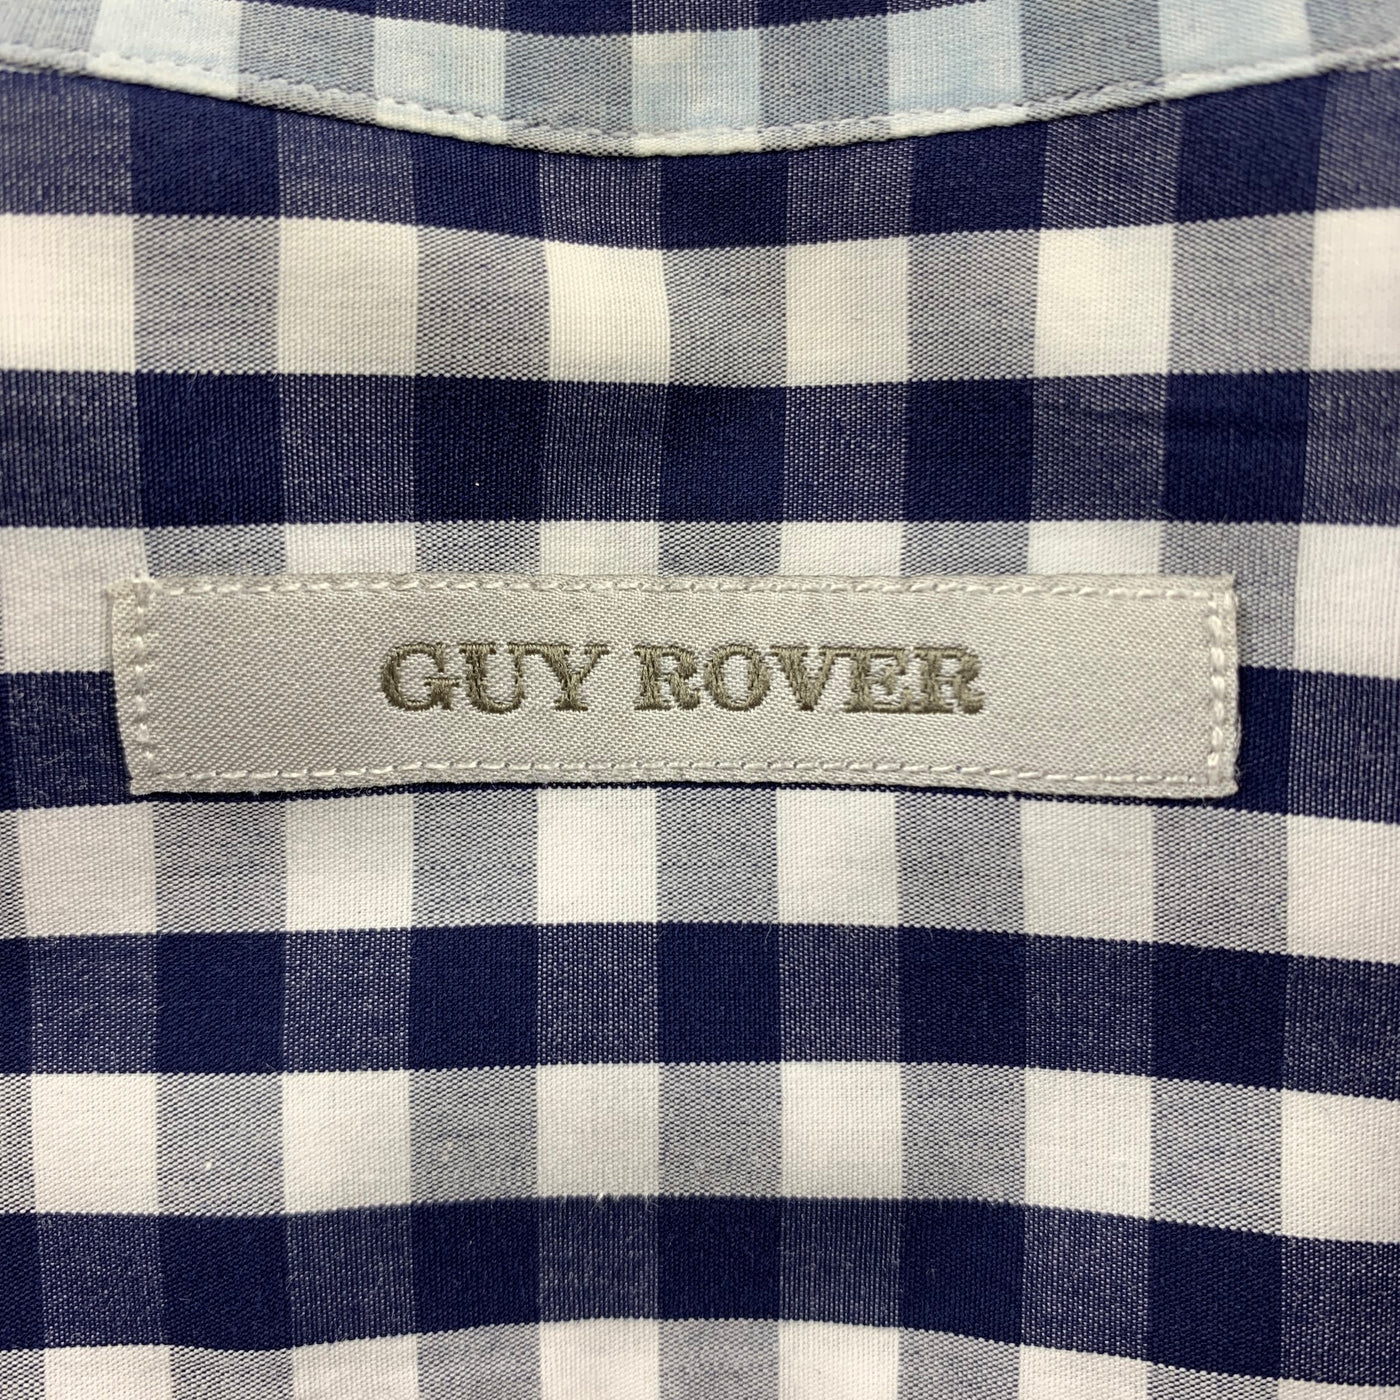 GUY ROVER Size XS Navy & White Checkered Cotton Button Up Long Sleeve Shirt